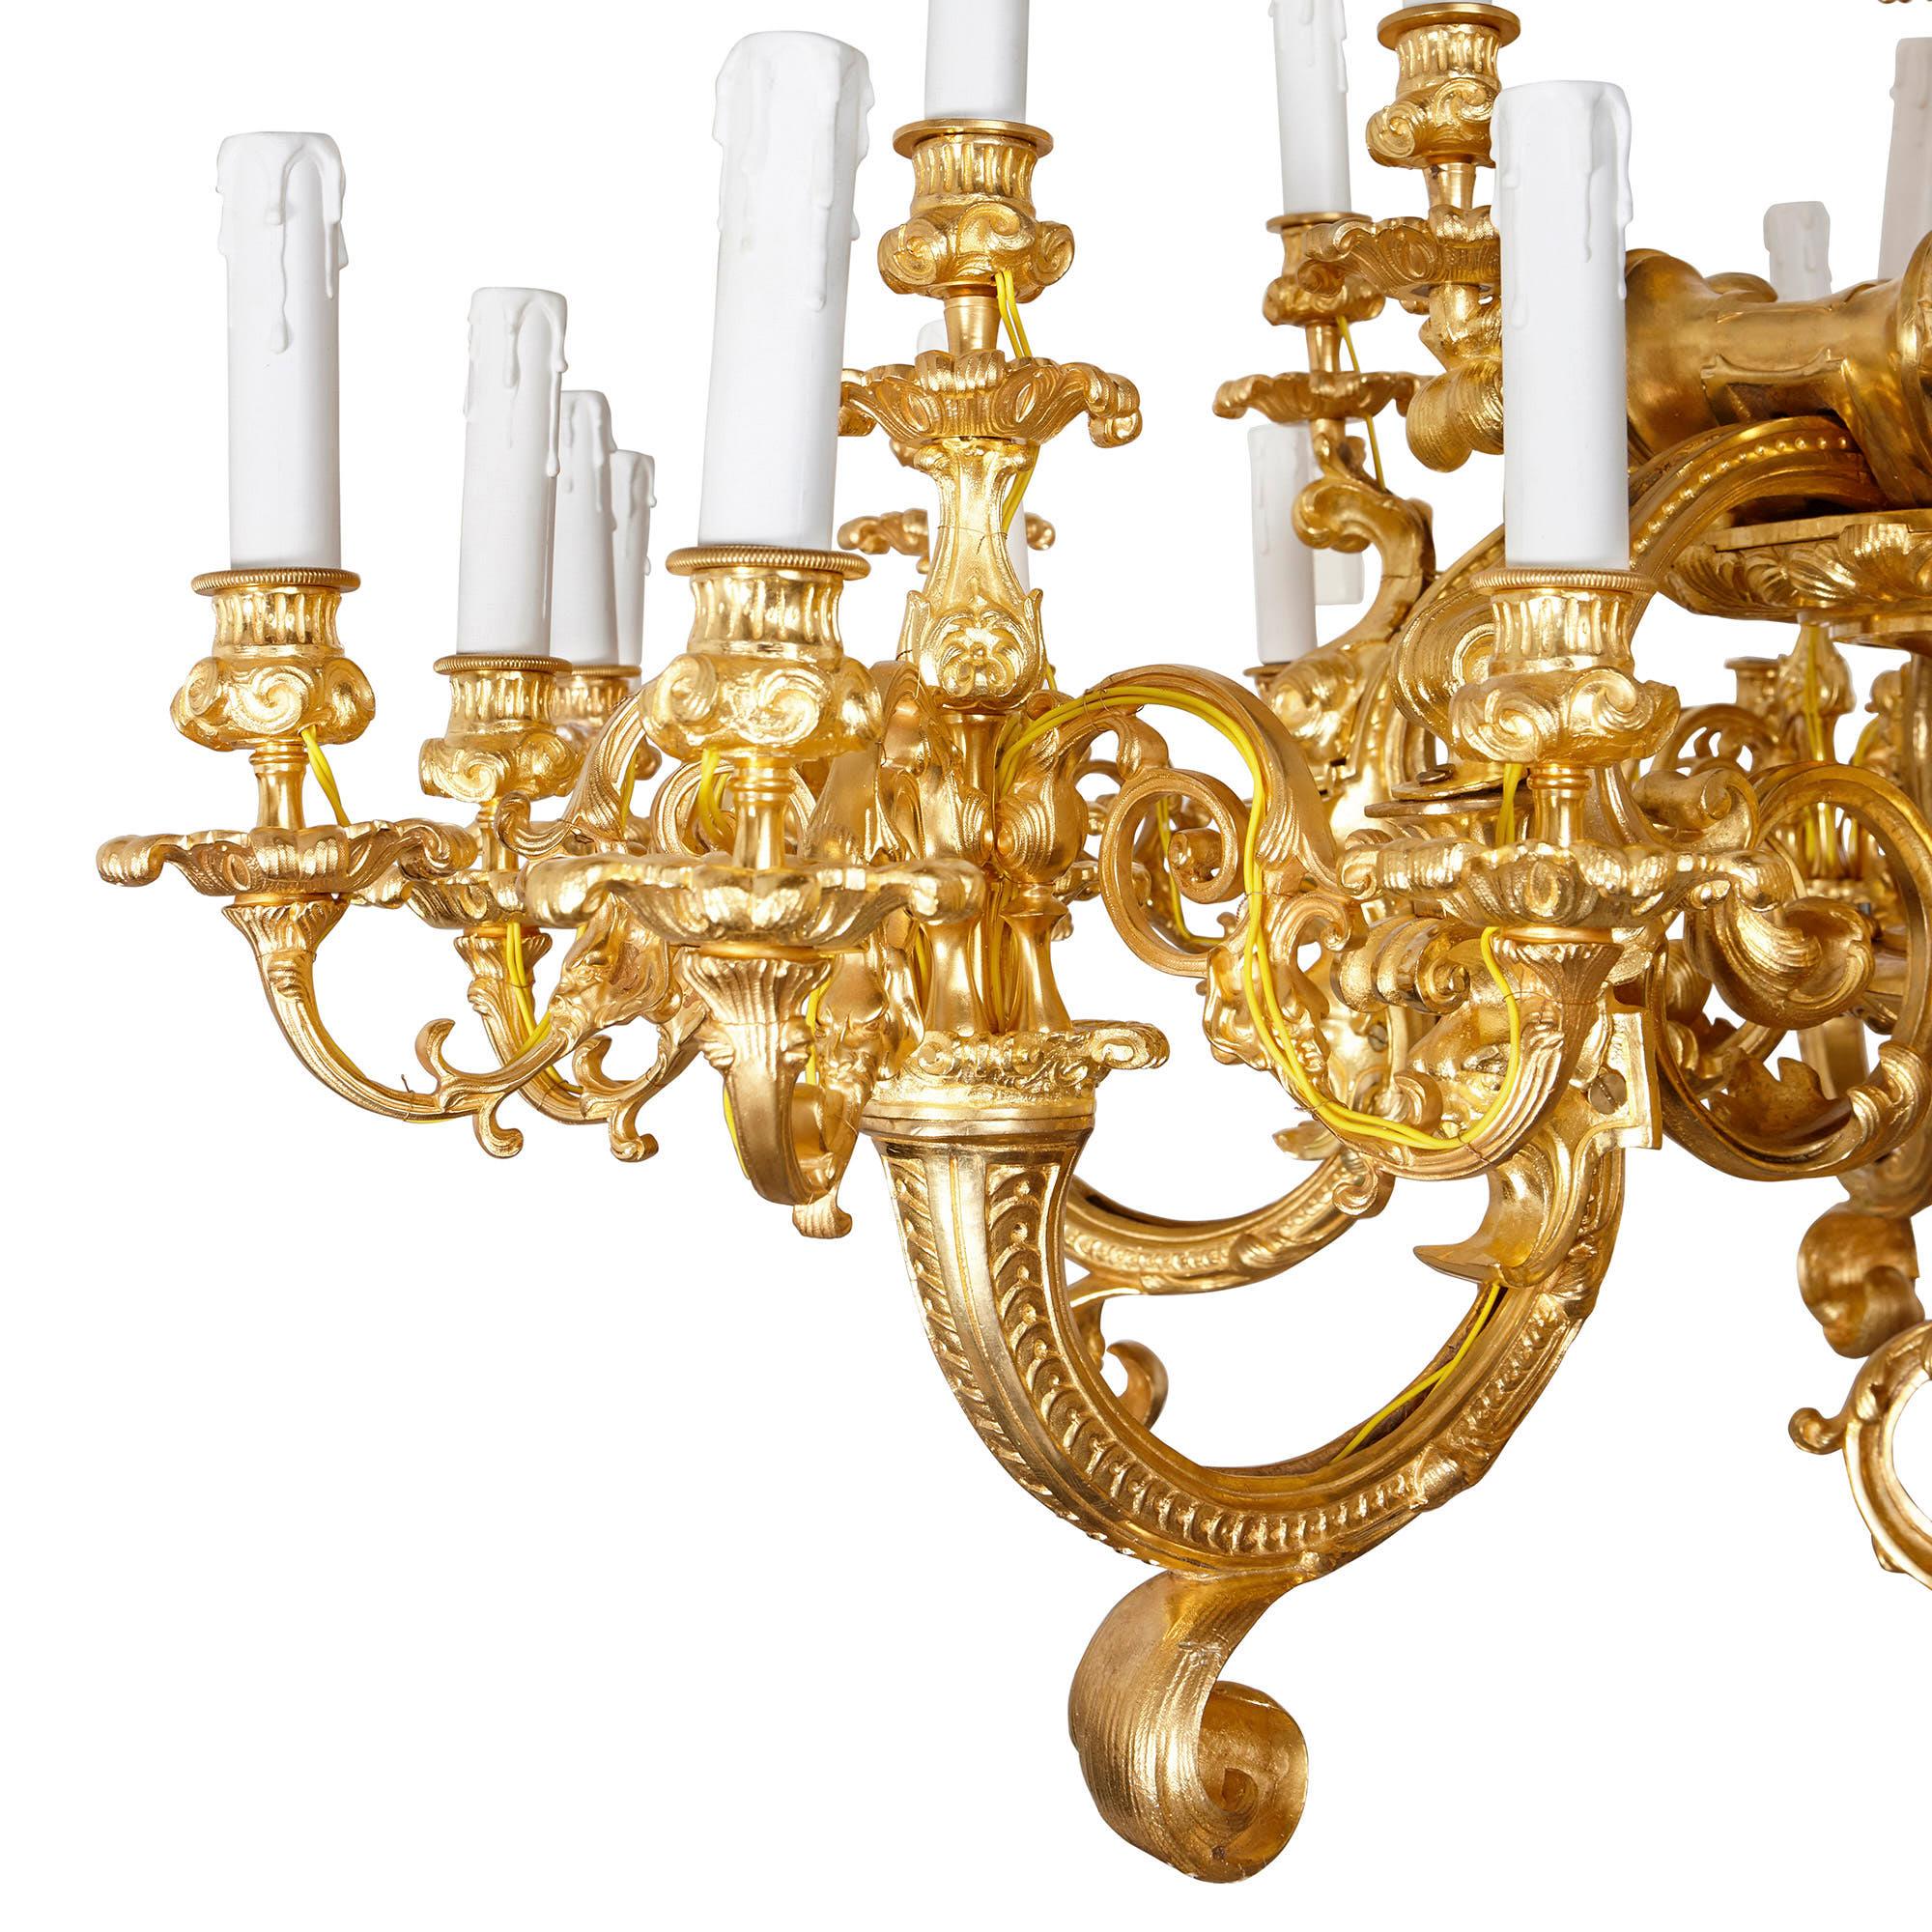 This impressive, eighteen-light chandelier—which measures 1.7 metres (67 inches) in height—will bring grandeur and majesty to a room. It is crafted in a bold Baroque style, which was typical of decorative arts produced in France during the reign of